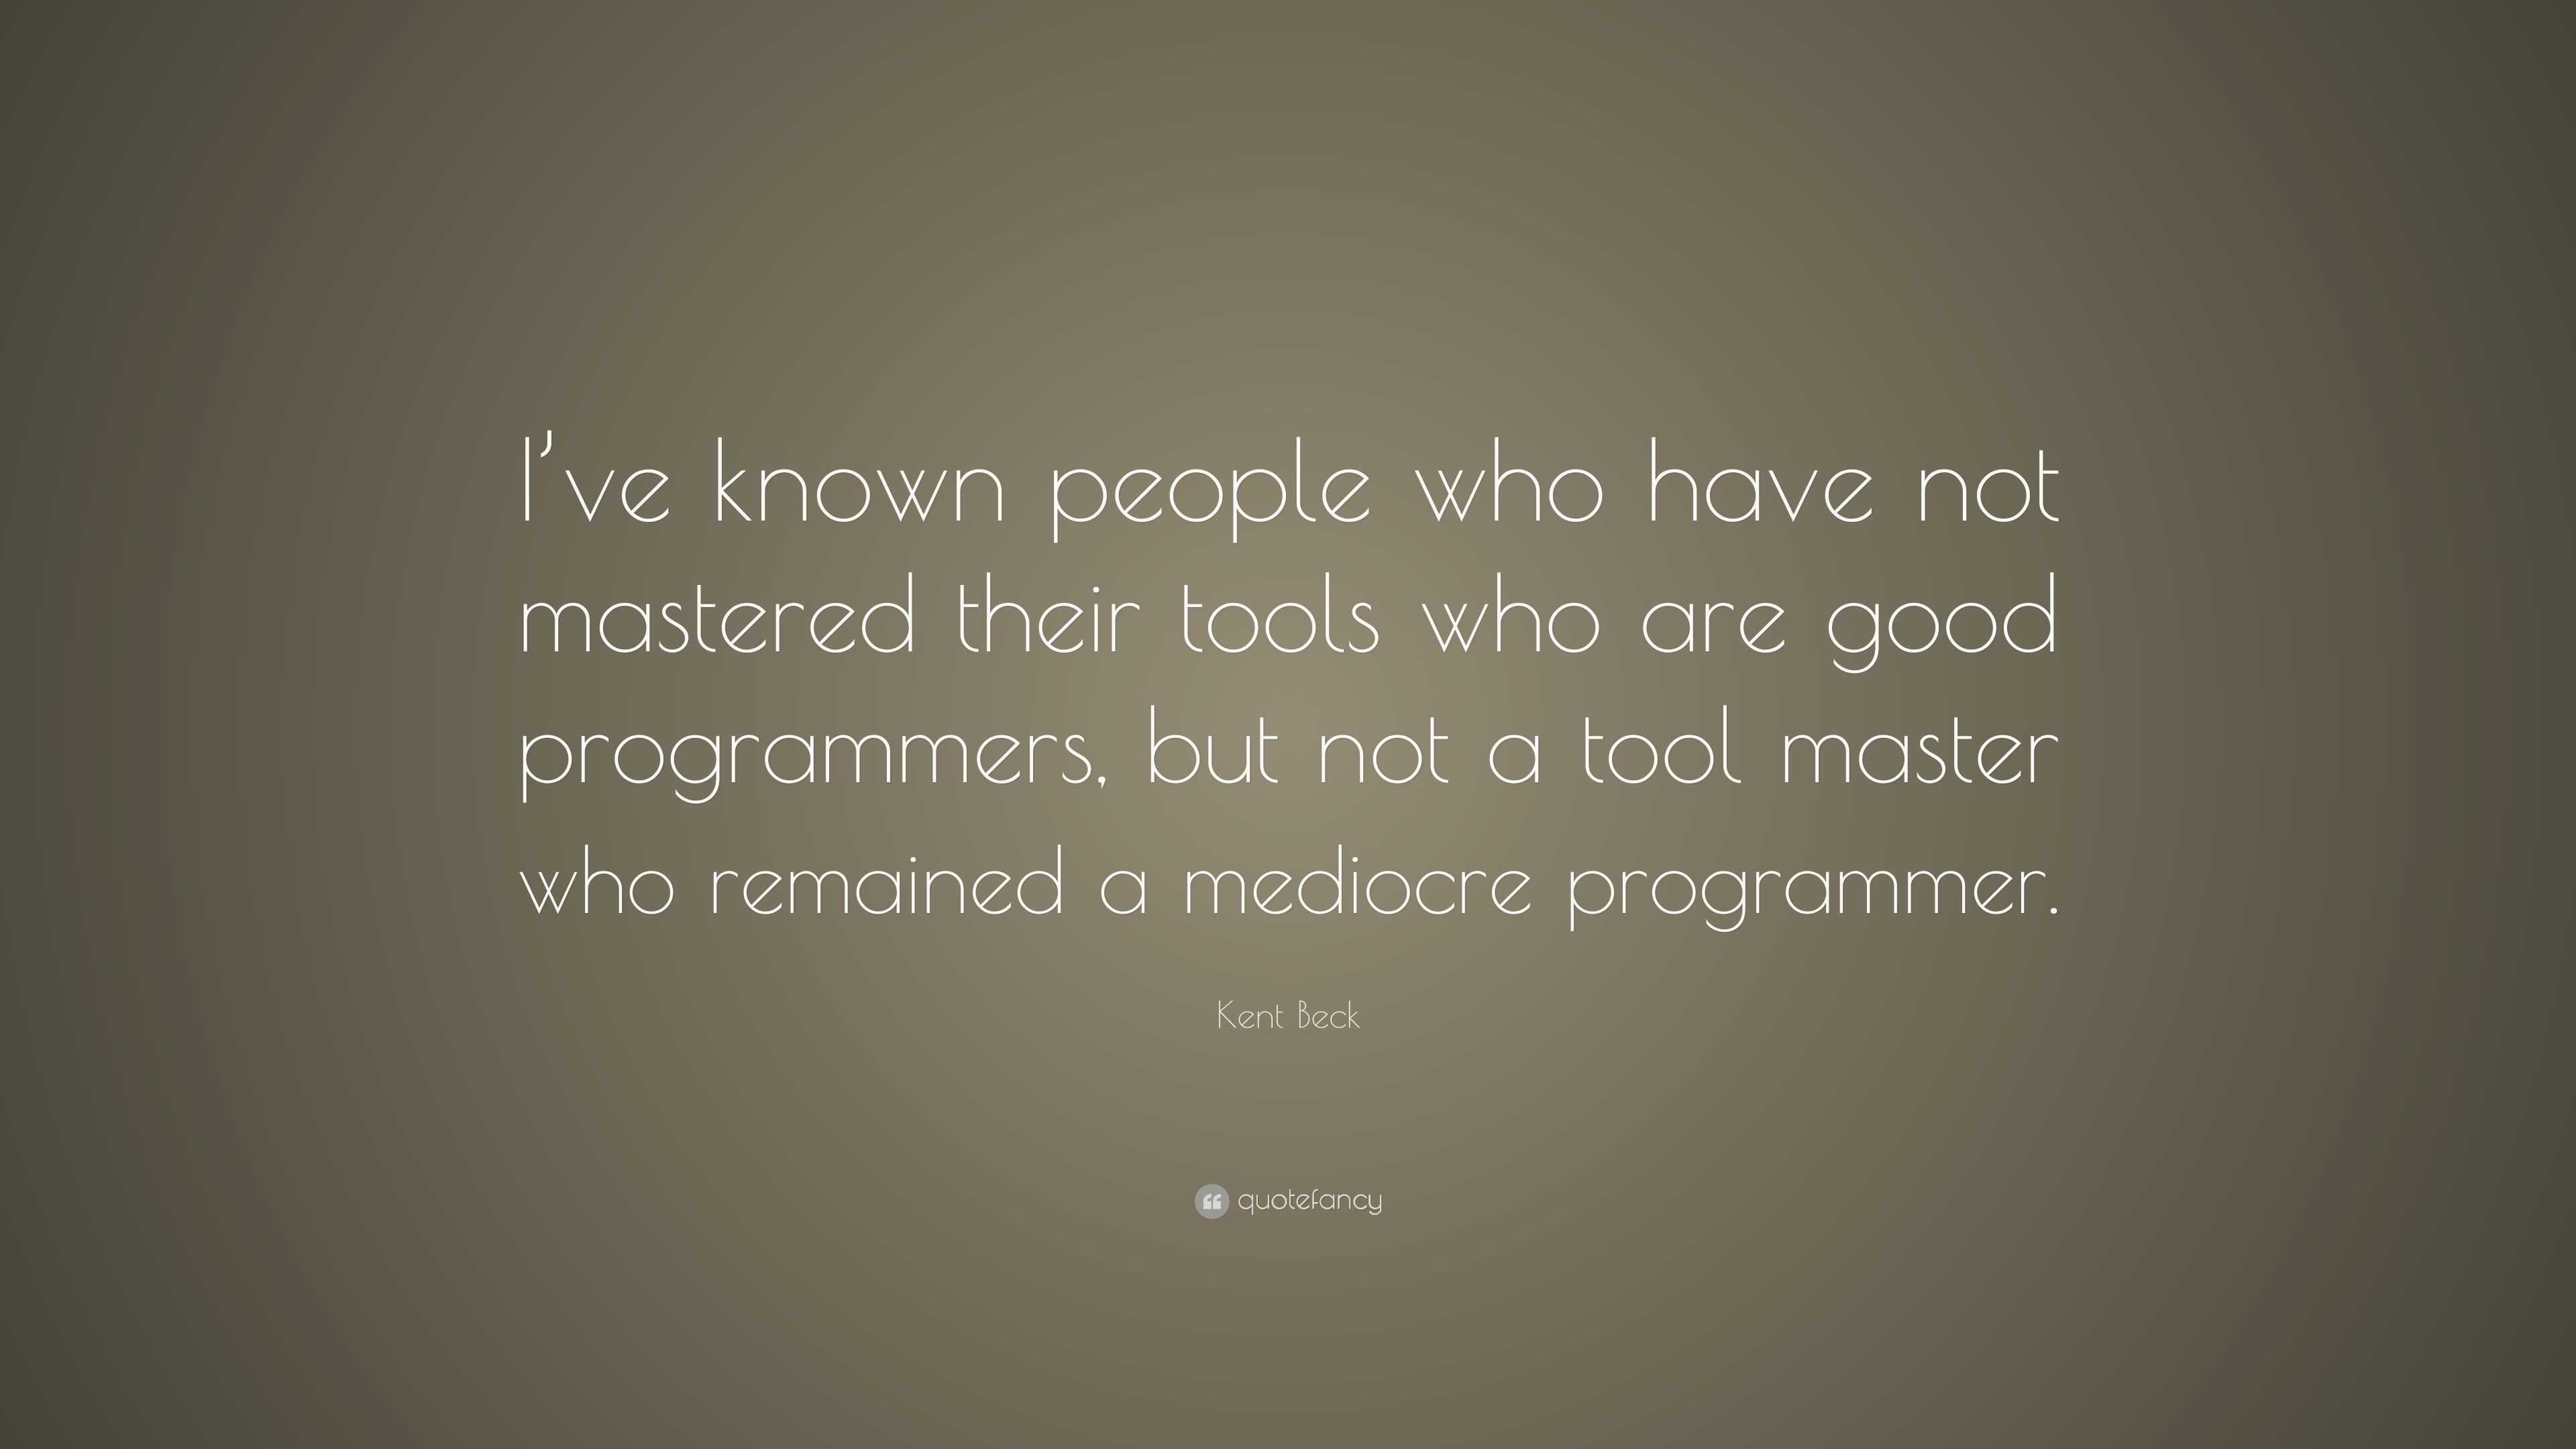 Kent Beck Quote: “I’ve known people who have not mastered their tools ...